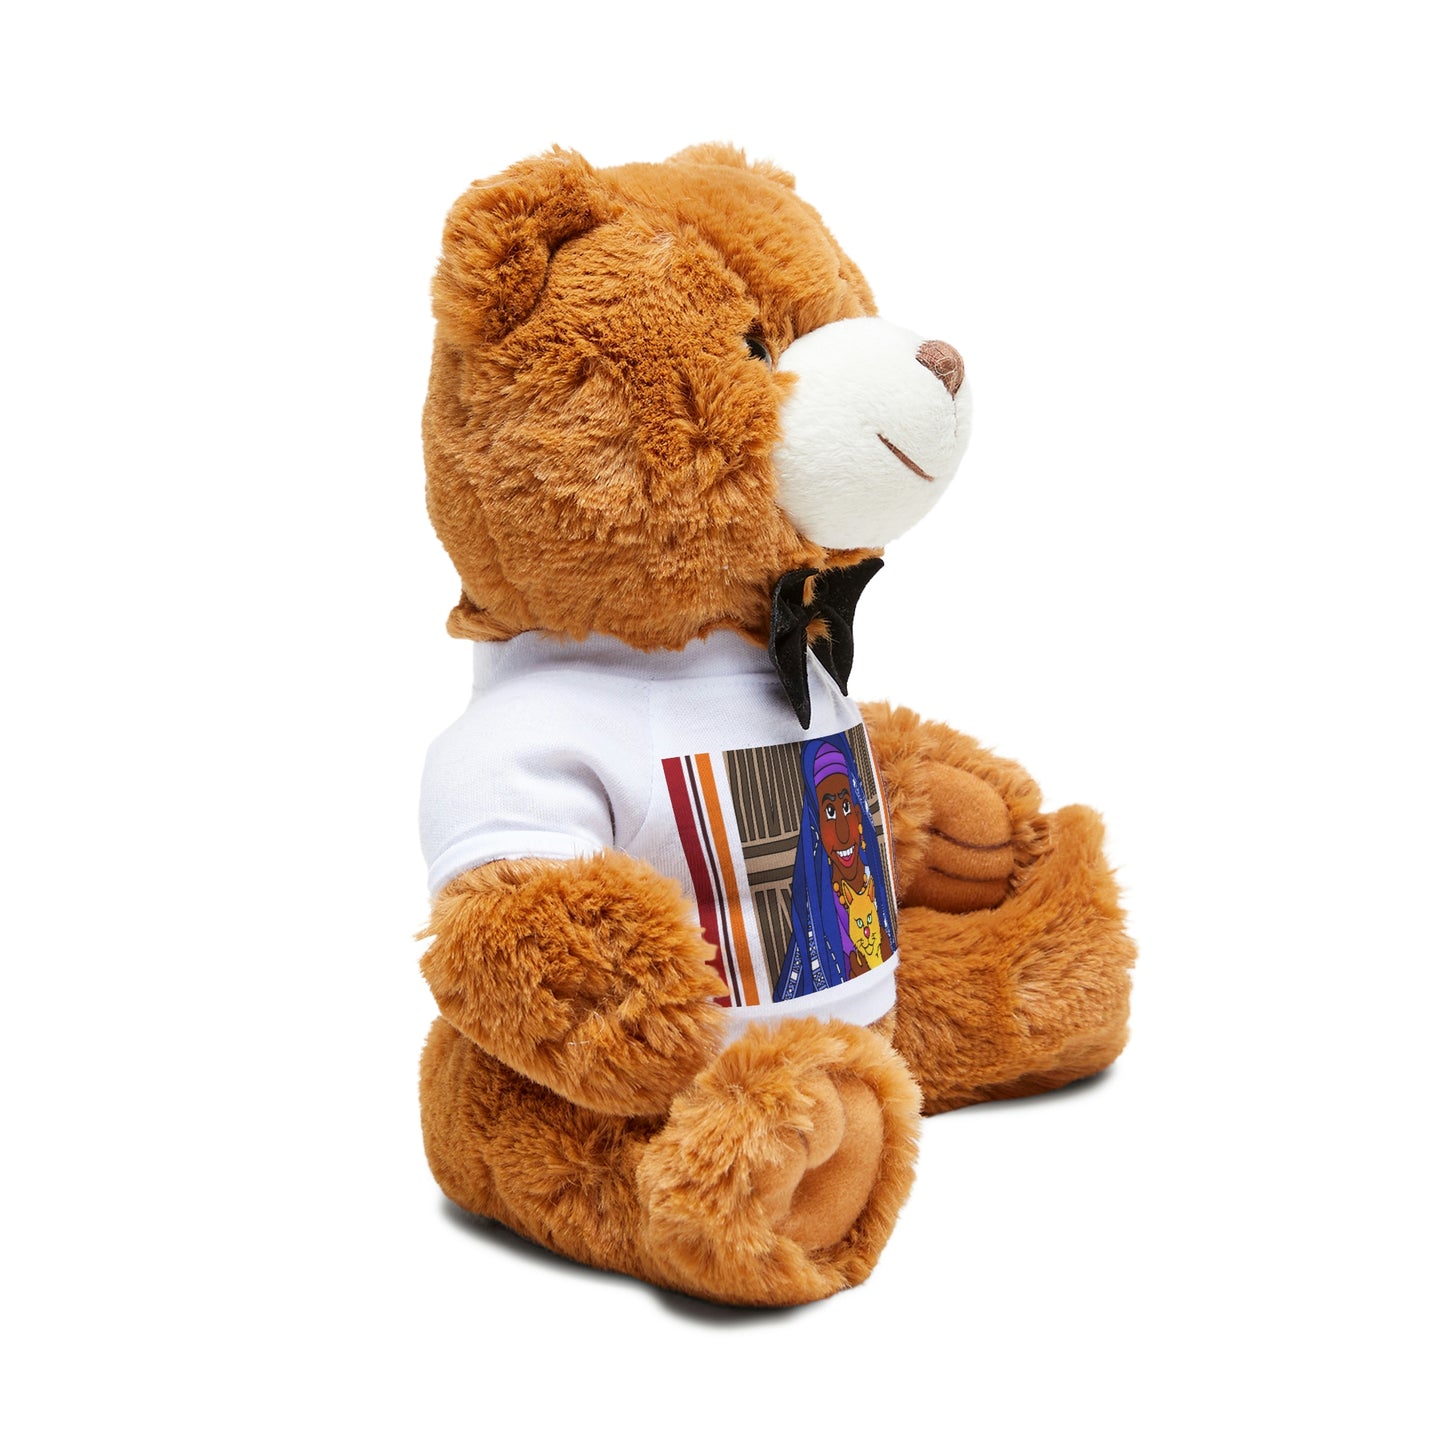 The Kitty Cat Cried! Teddy Bear with T-Shirt